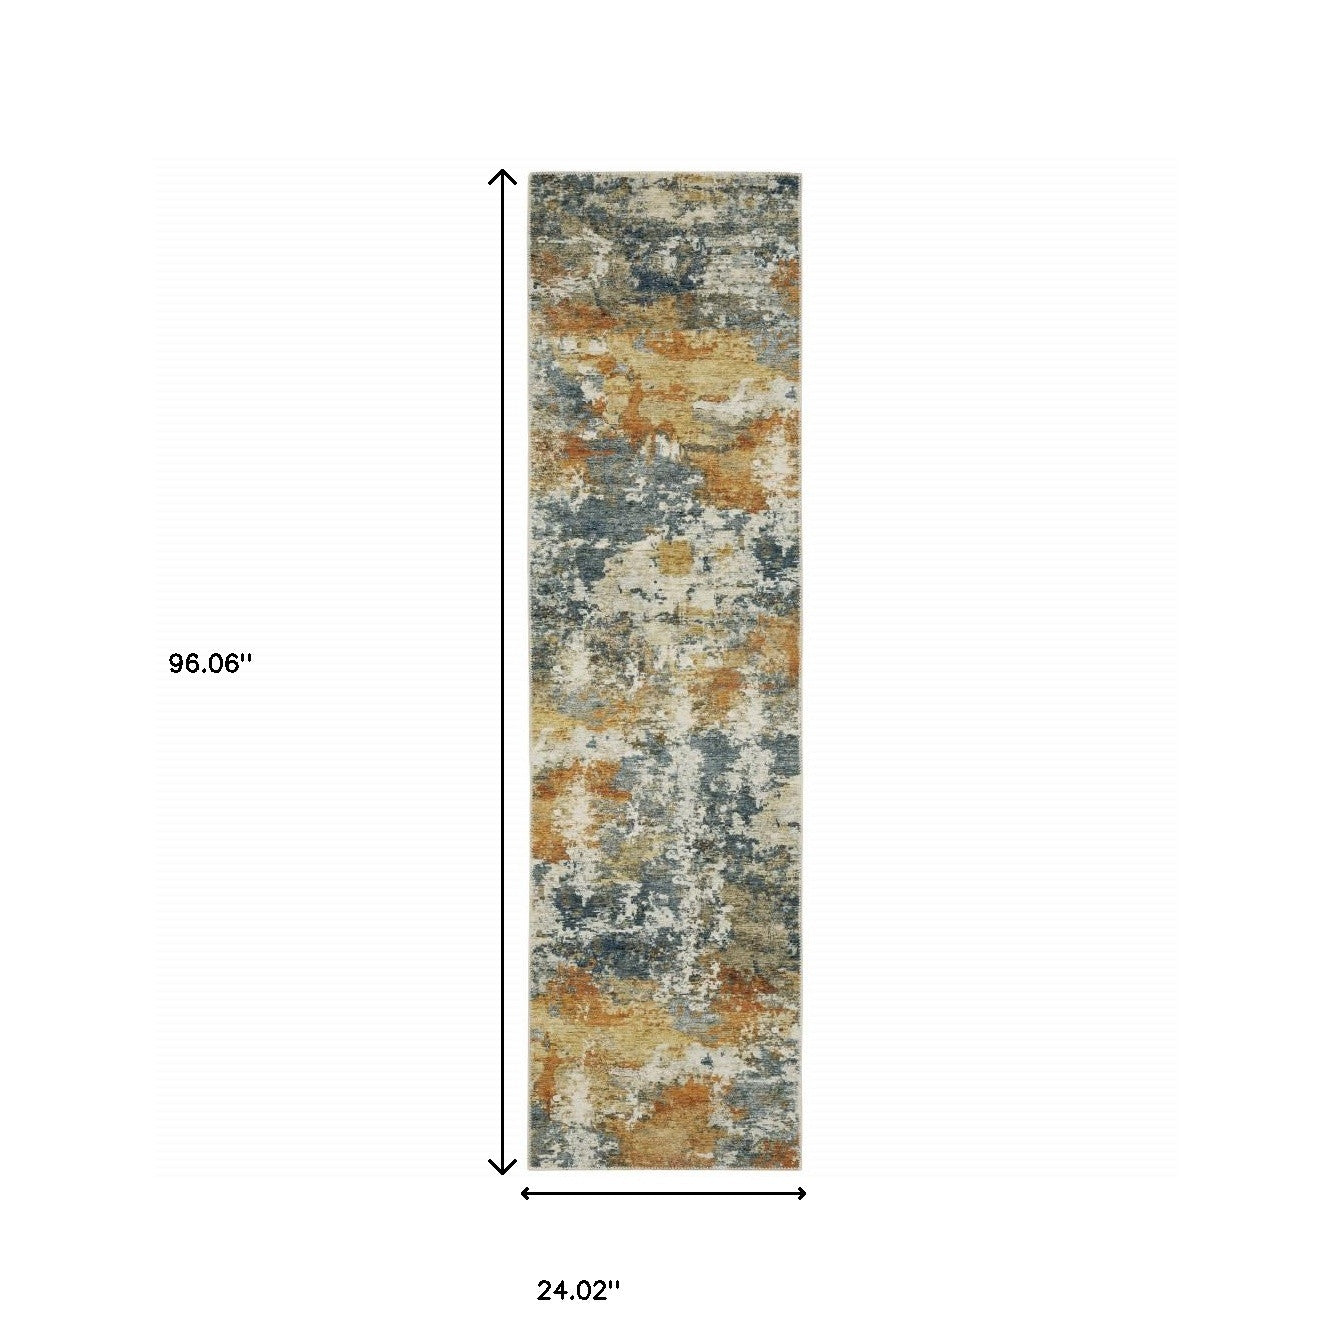 2' X 8' Teal Blue Orange Gold Grey Tan Brown And Beige Abstract Printed Stain Resistant Non Skid Runner Rug